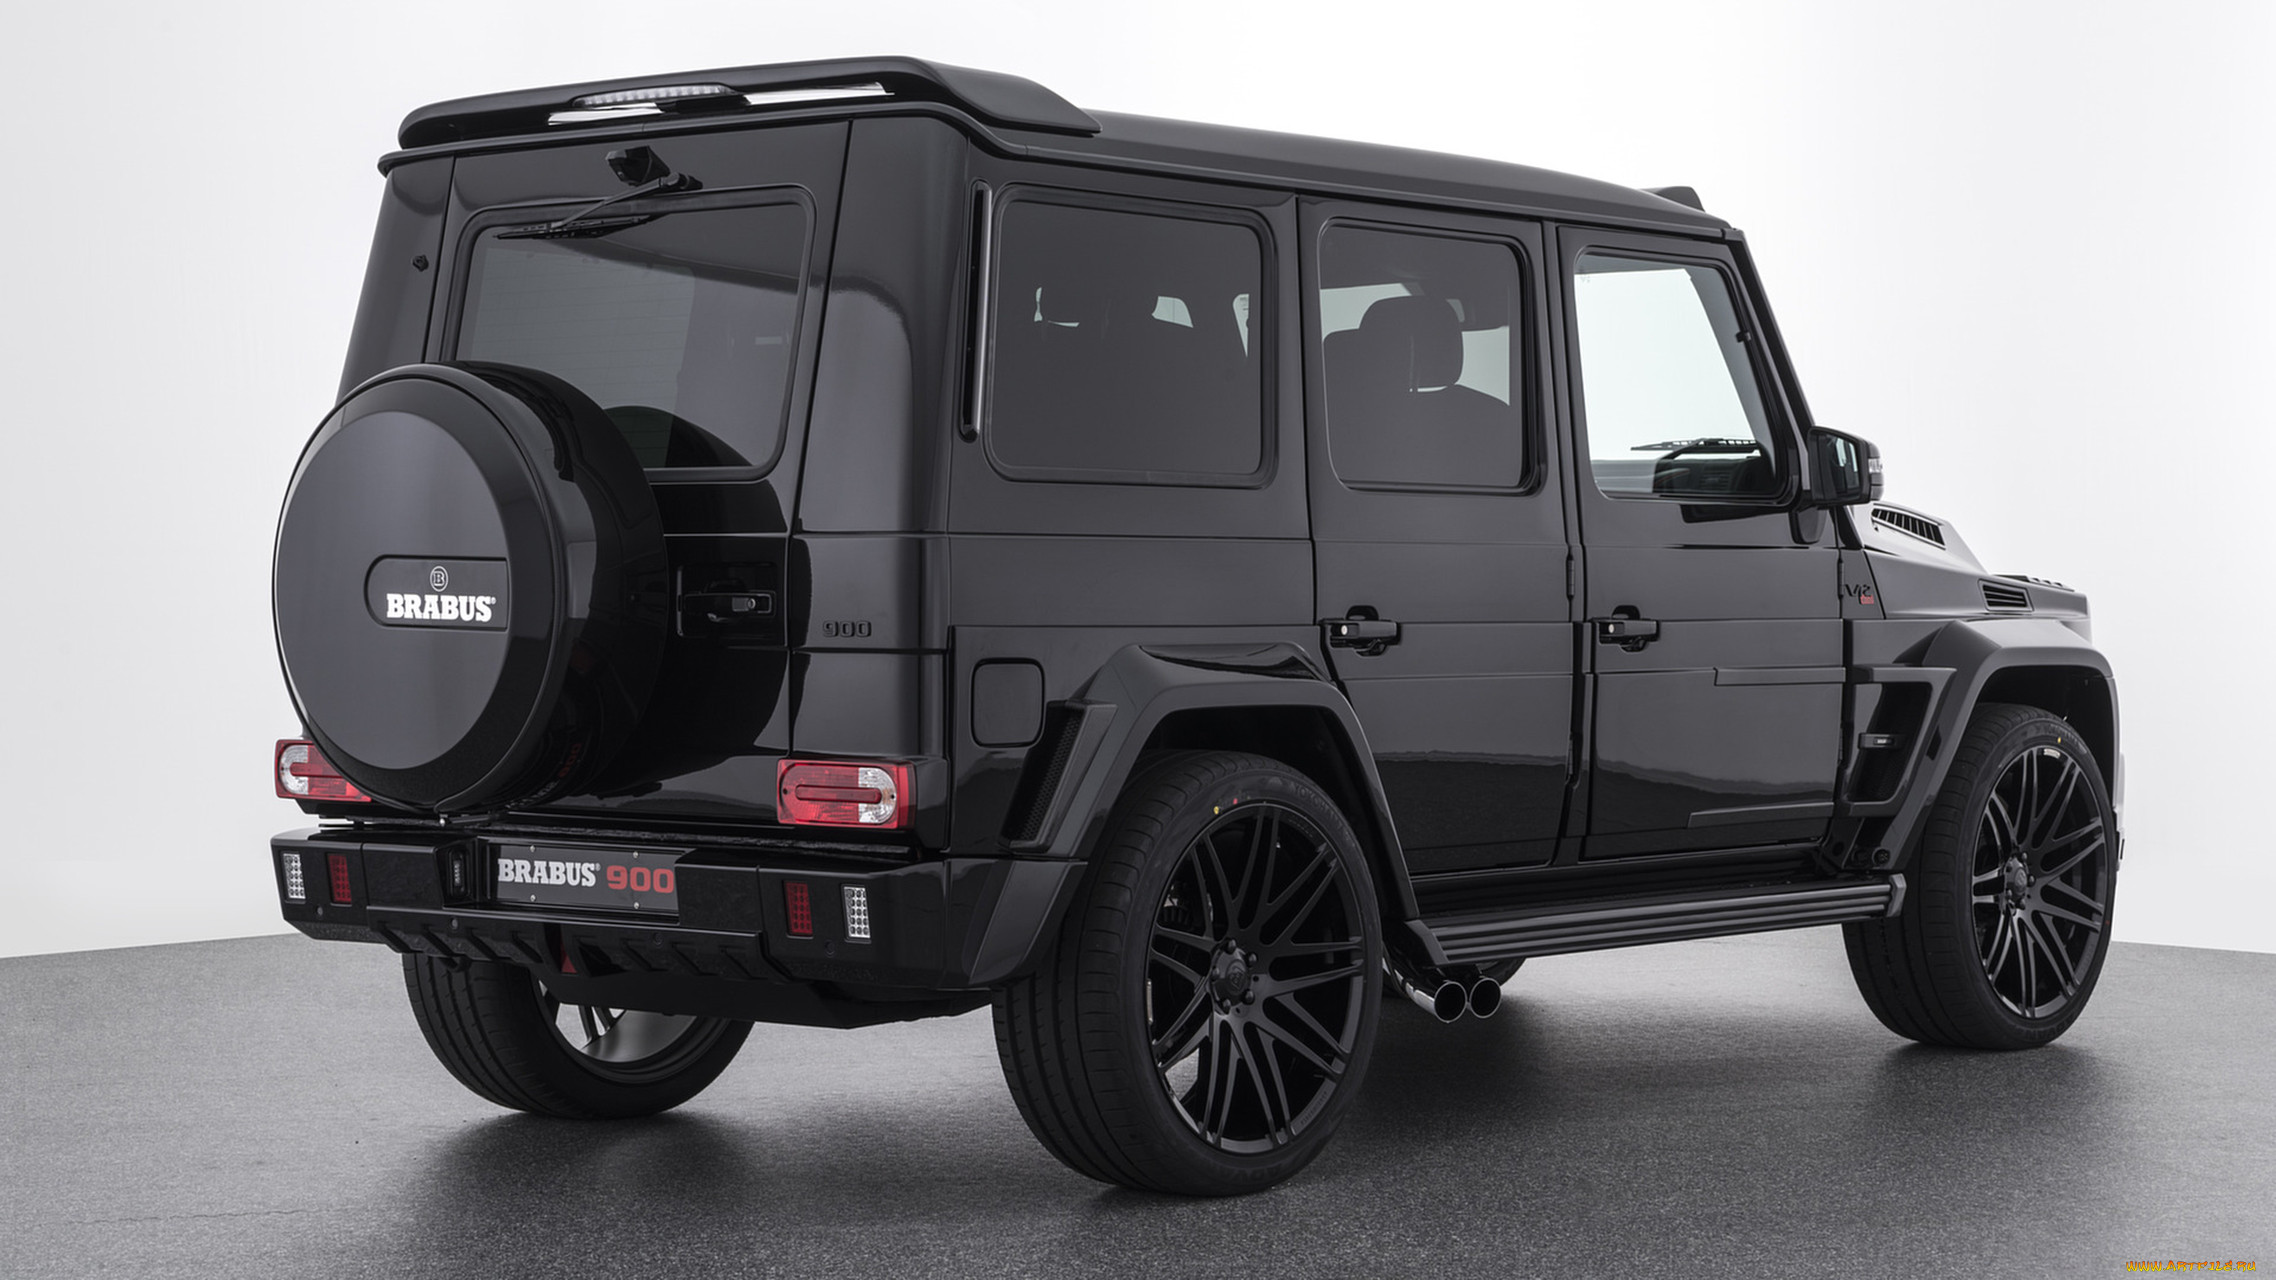 brabus 900 one of ten based on mercedes-benz amg g-65 2018, , brabus, 2018, g-65, amg, mercedes-benz, based, ten, one, 900